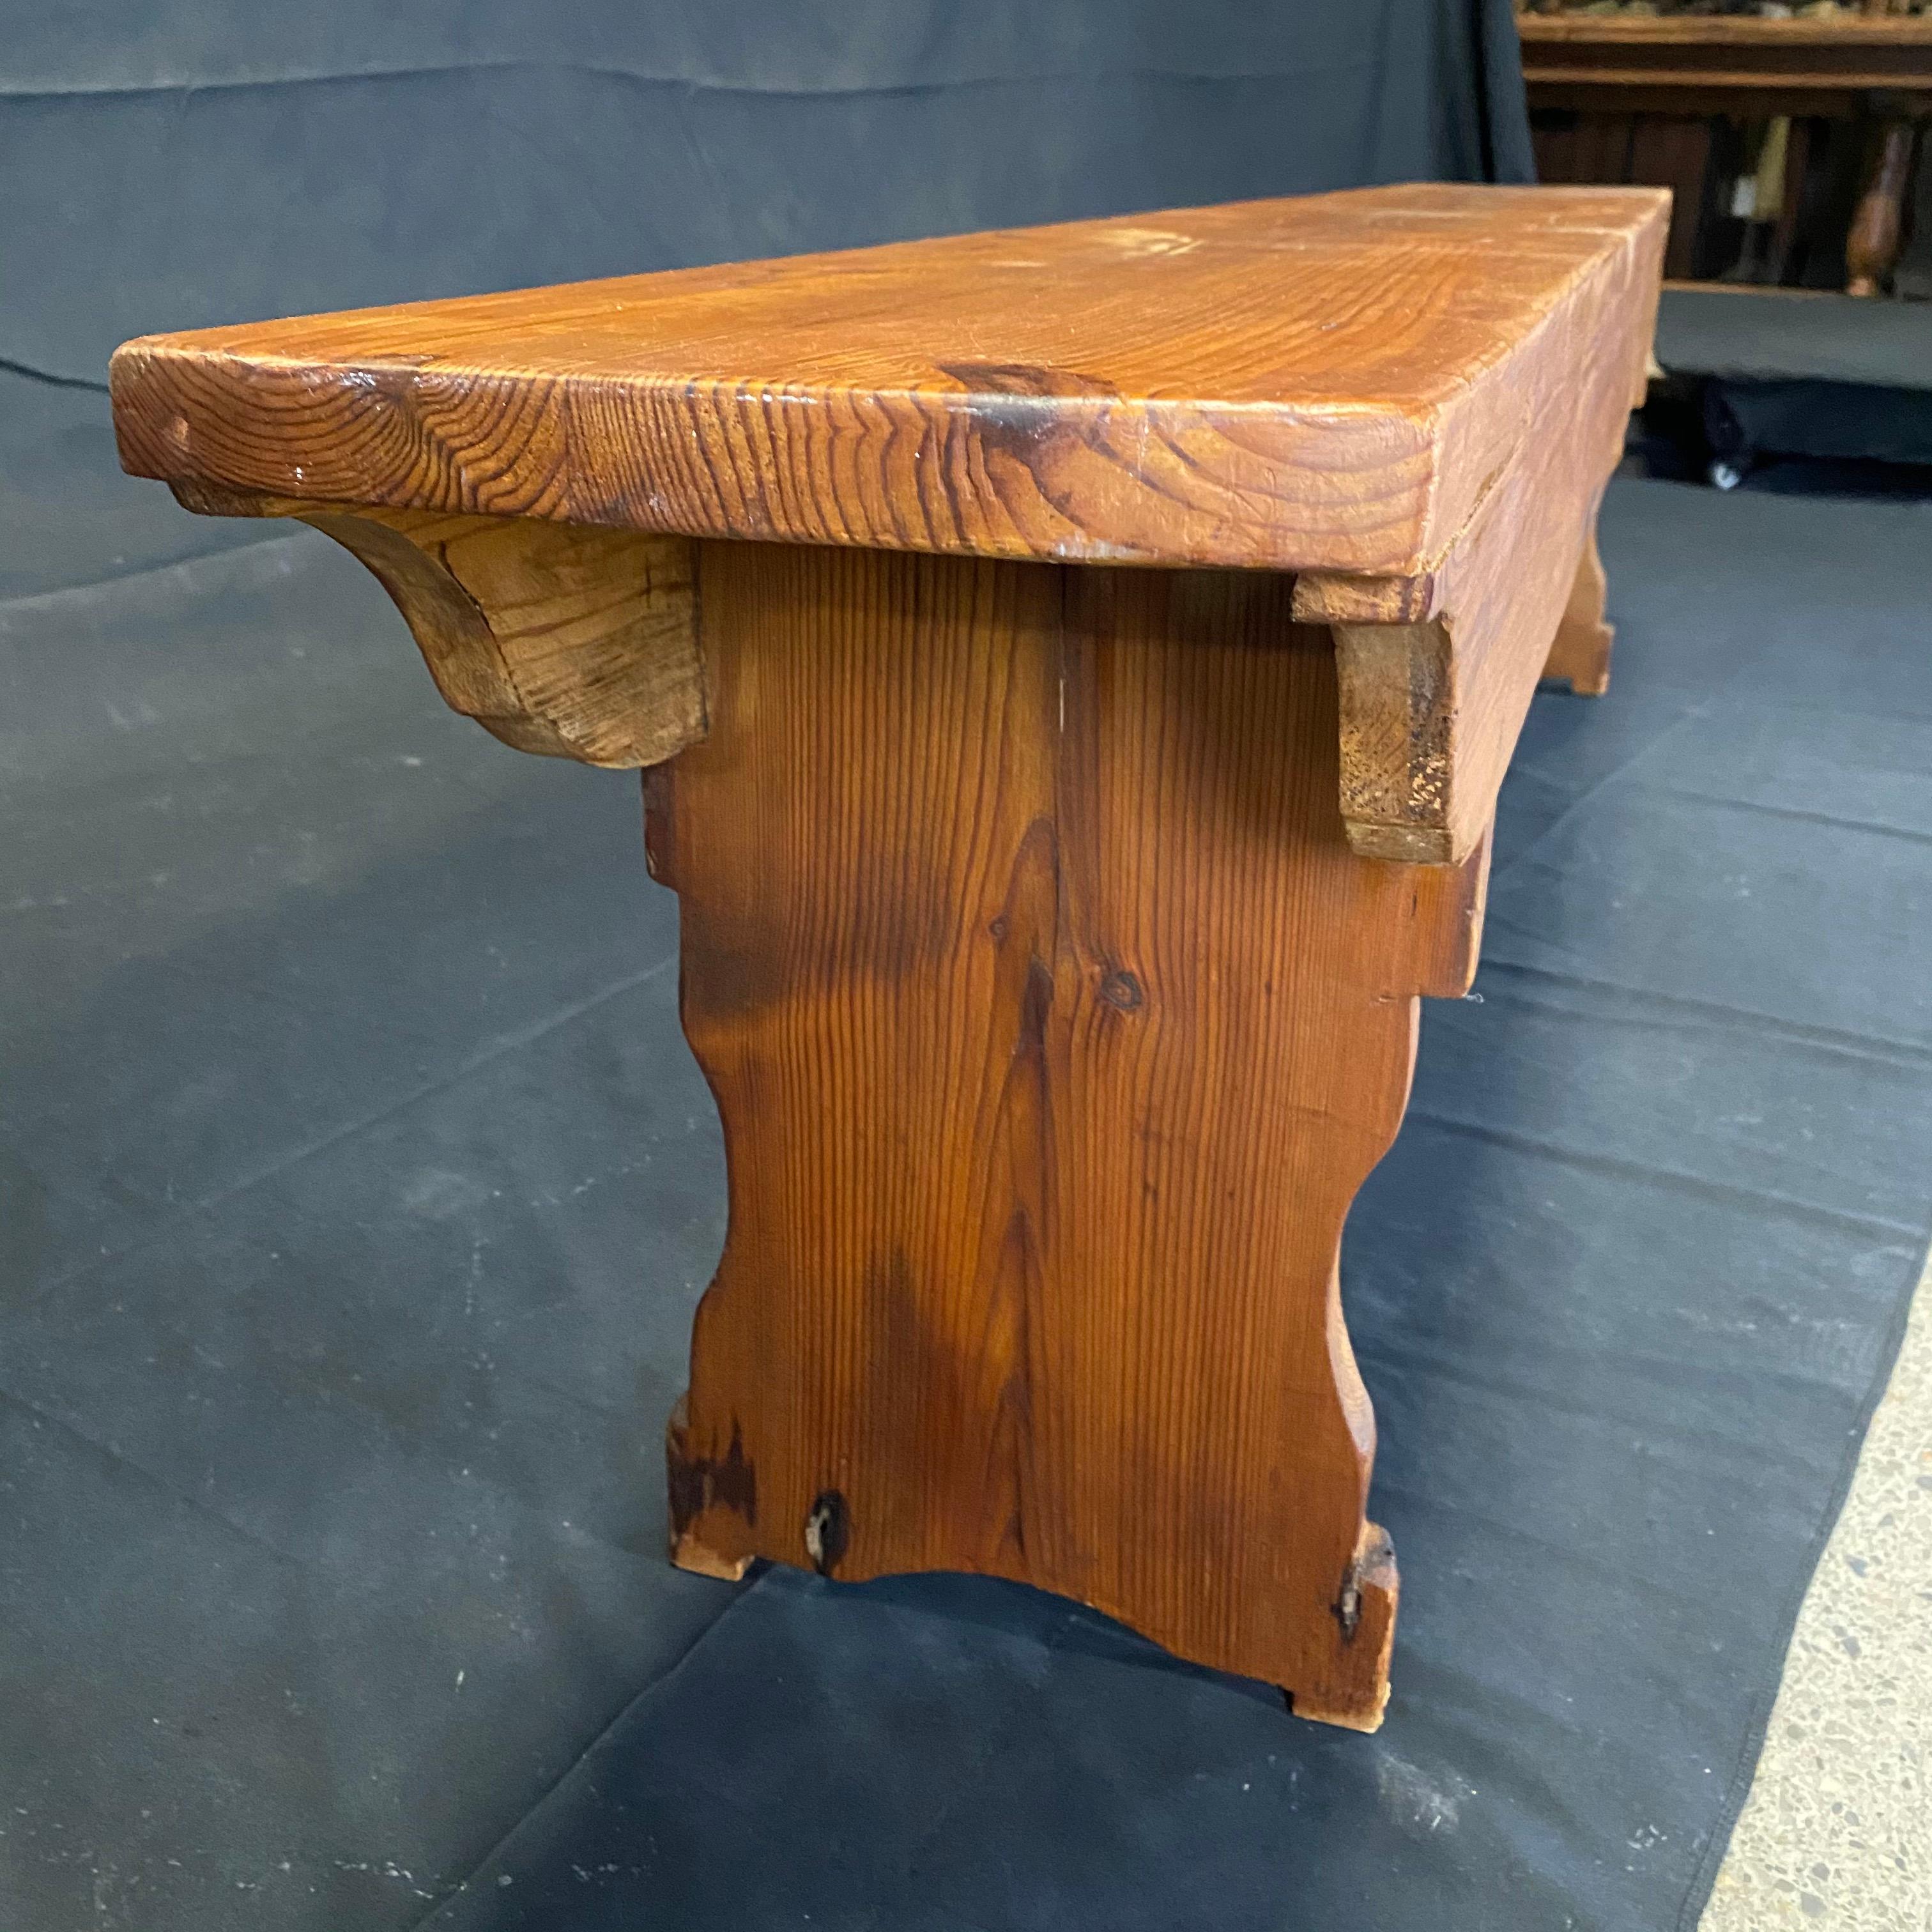 English long pine bench having a long rectangular seat which rests on two carved legs. The top of this bench is made from a single sturdy piece of pine, and on each side is a solid plank comprising the side aprons; the bench's solid construction